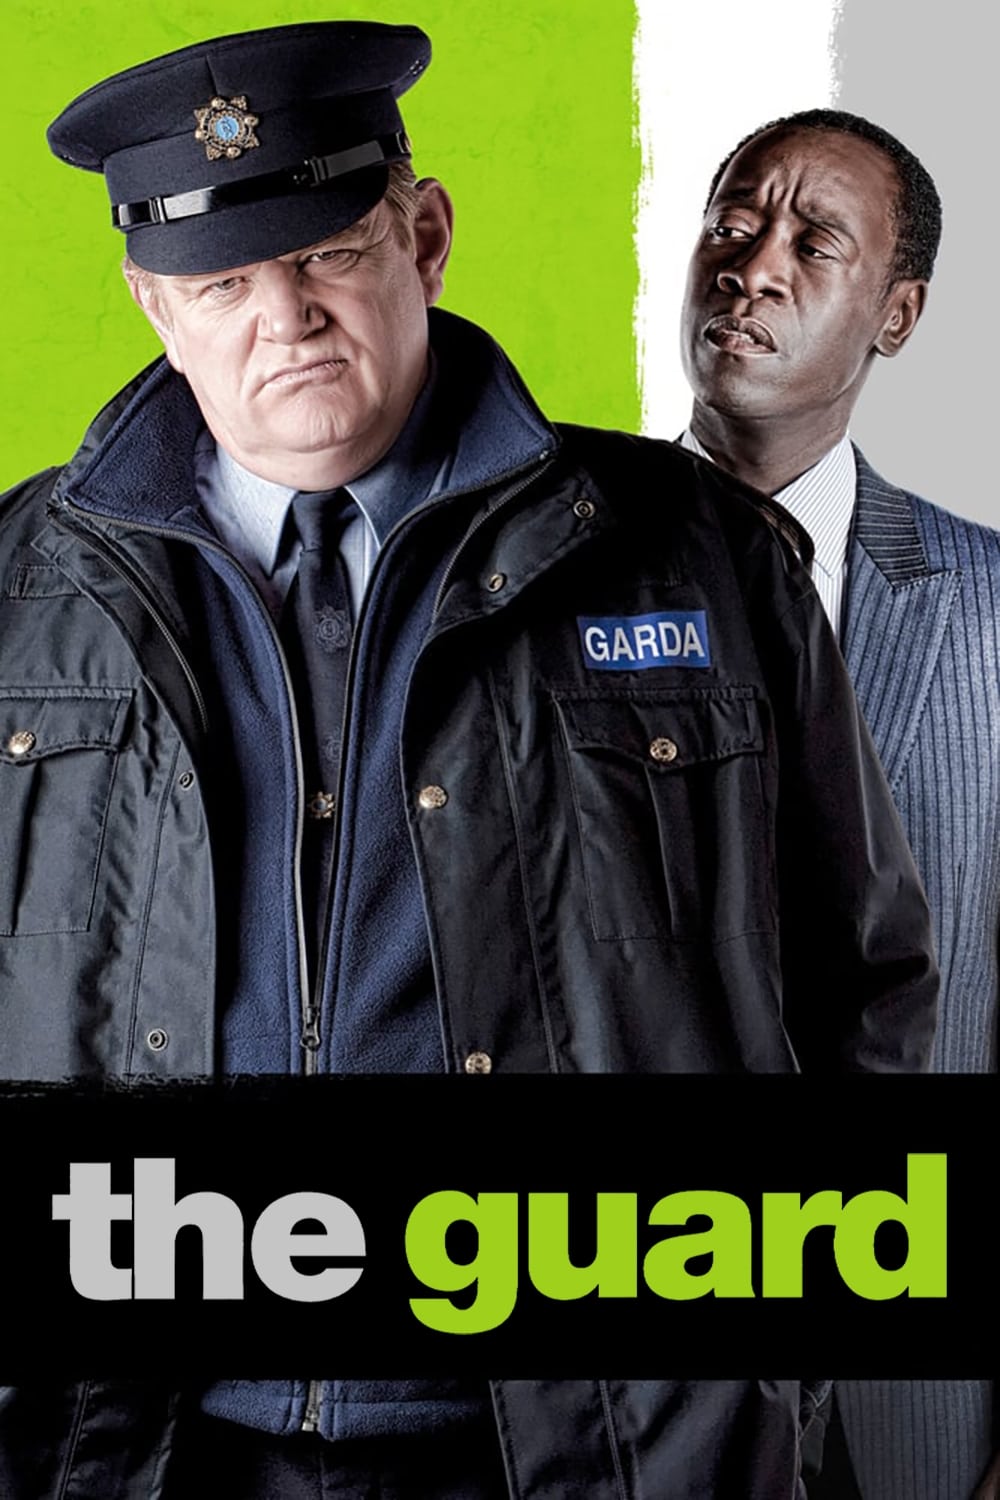 The Guard 2011 Full Movie Online In Hd Quality